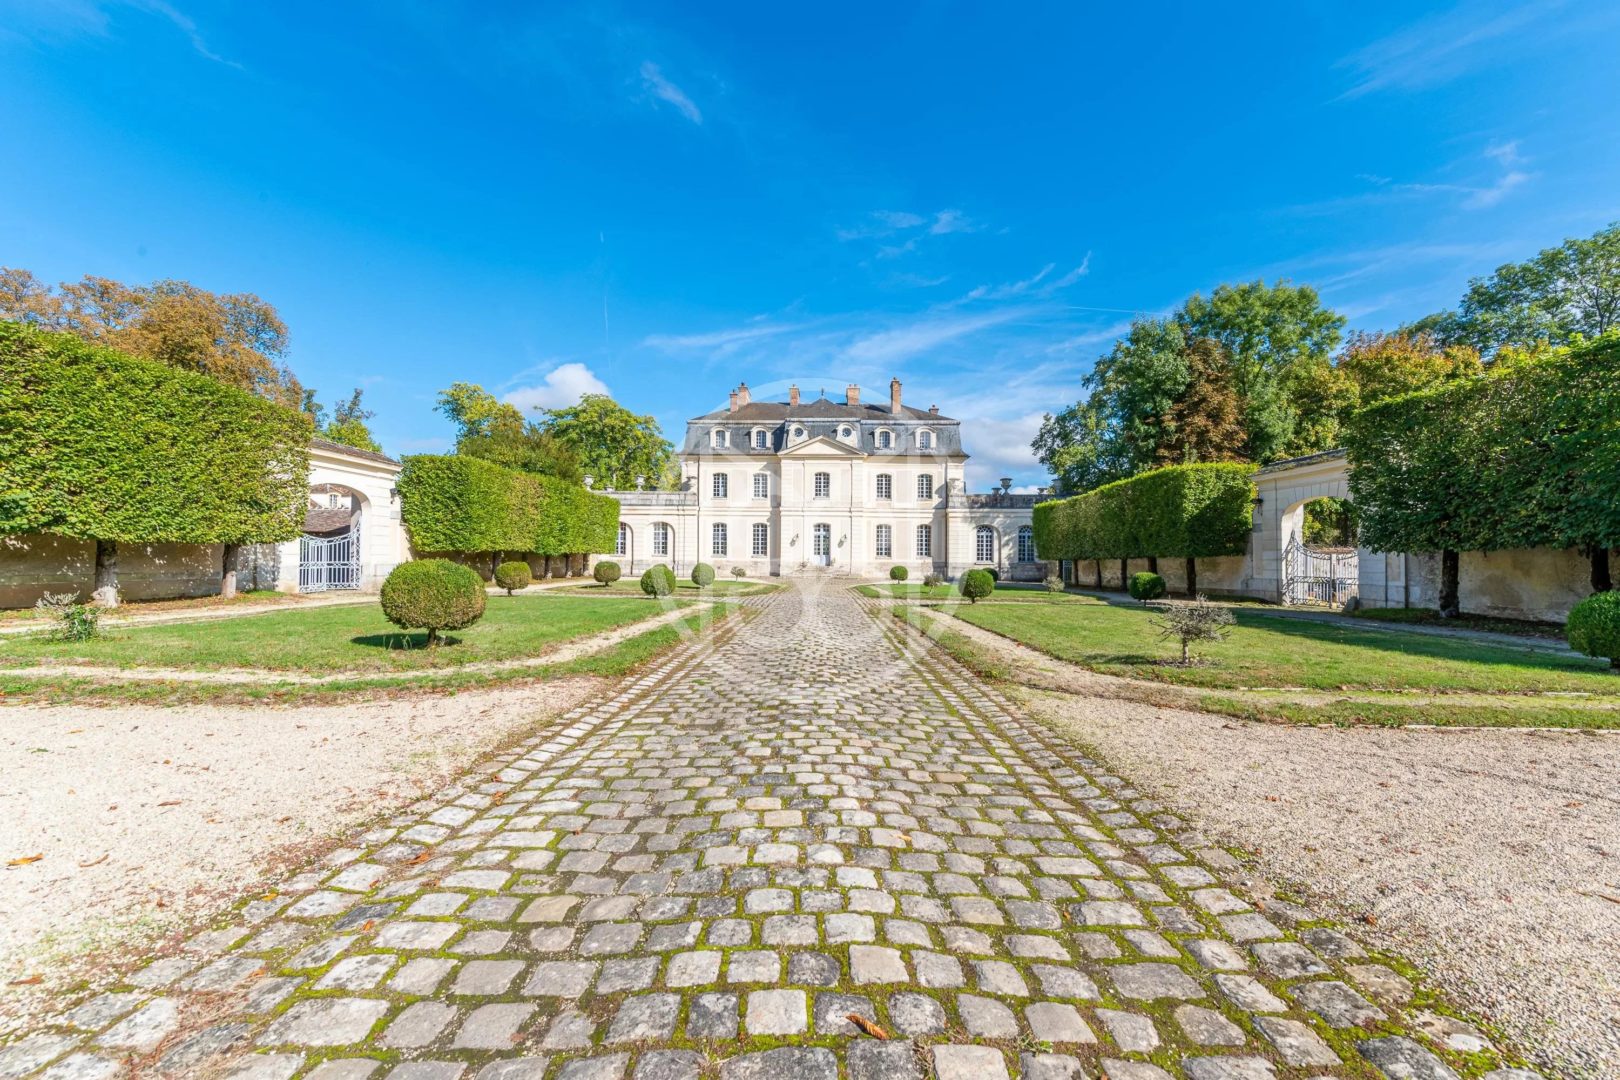 South-East of Paris, exceptional listed Chateau - 21548IF